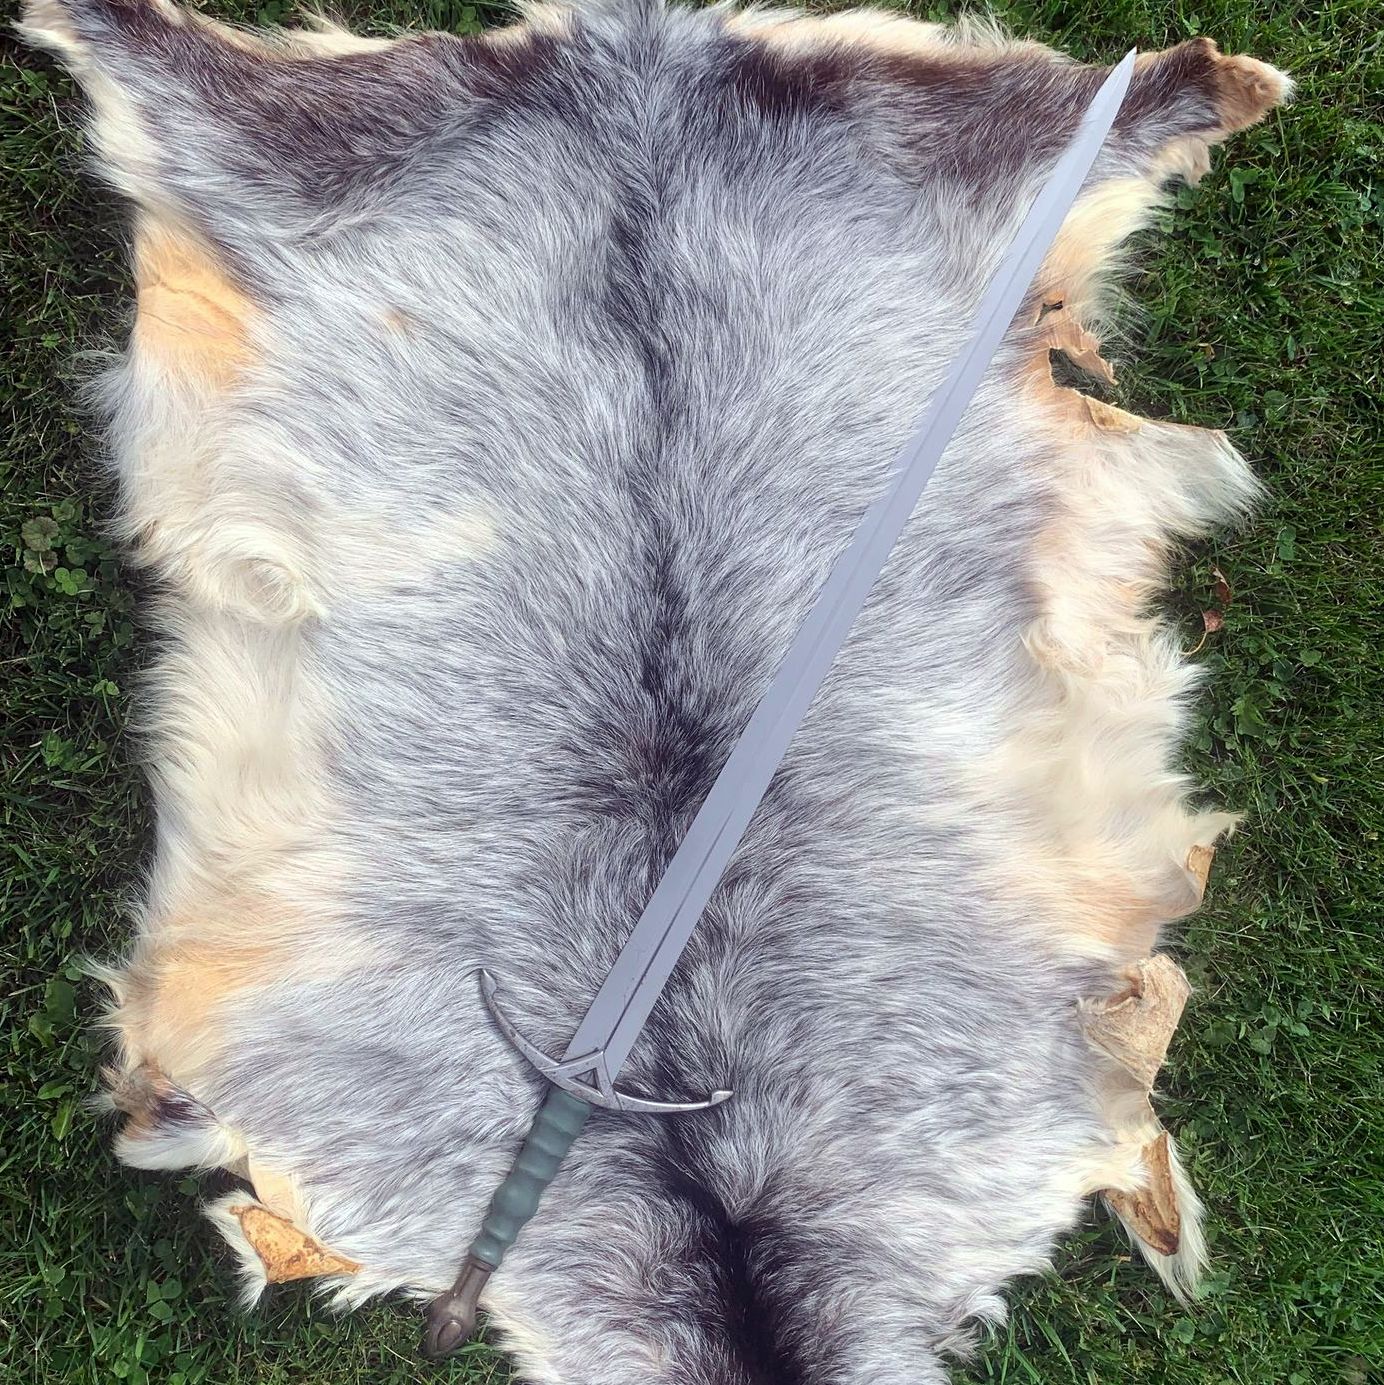 The sword of the forest, displayed on a fur hide